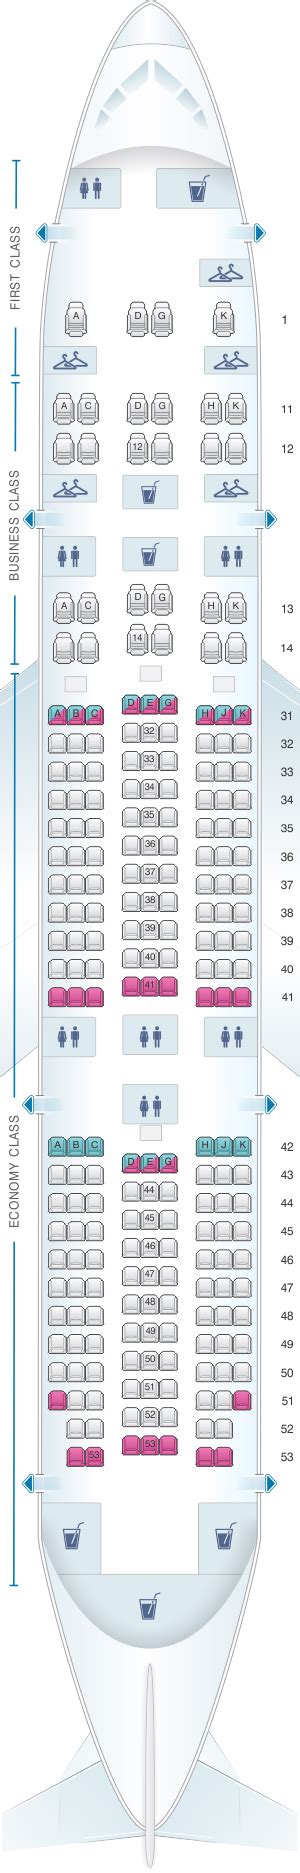 Seat Map China Southern Airlines Boeing B787